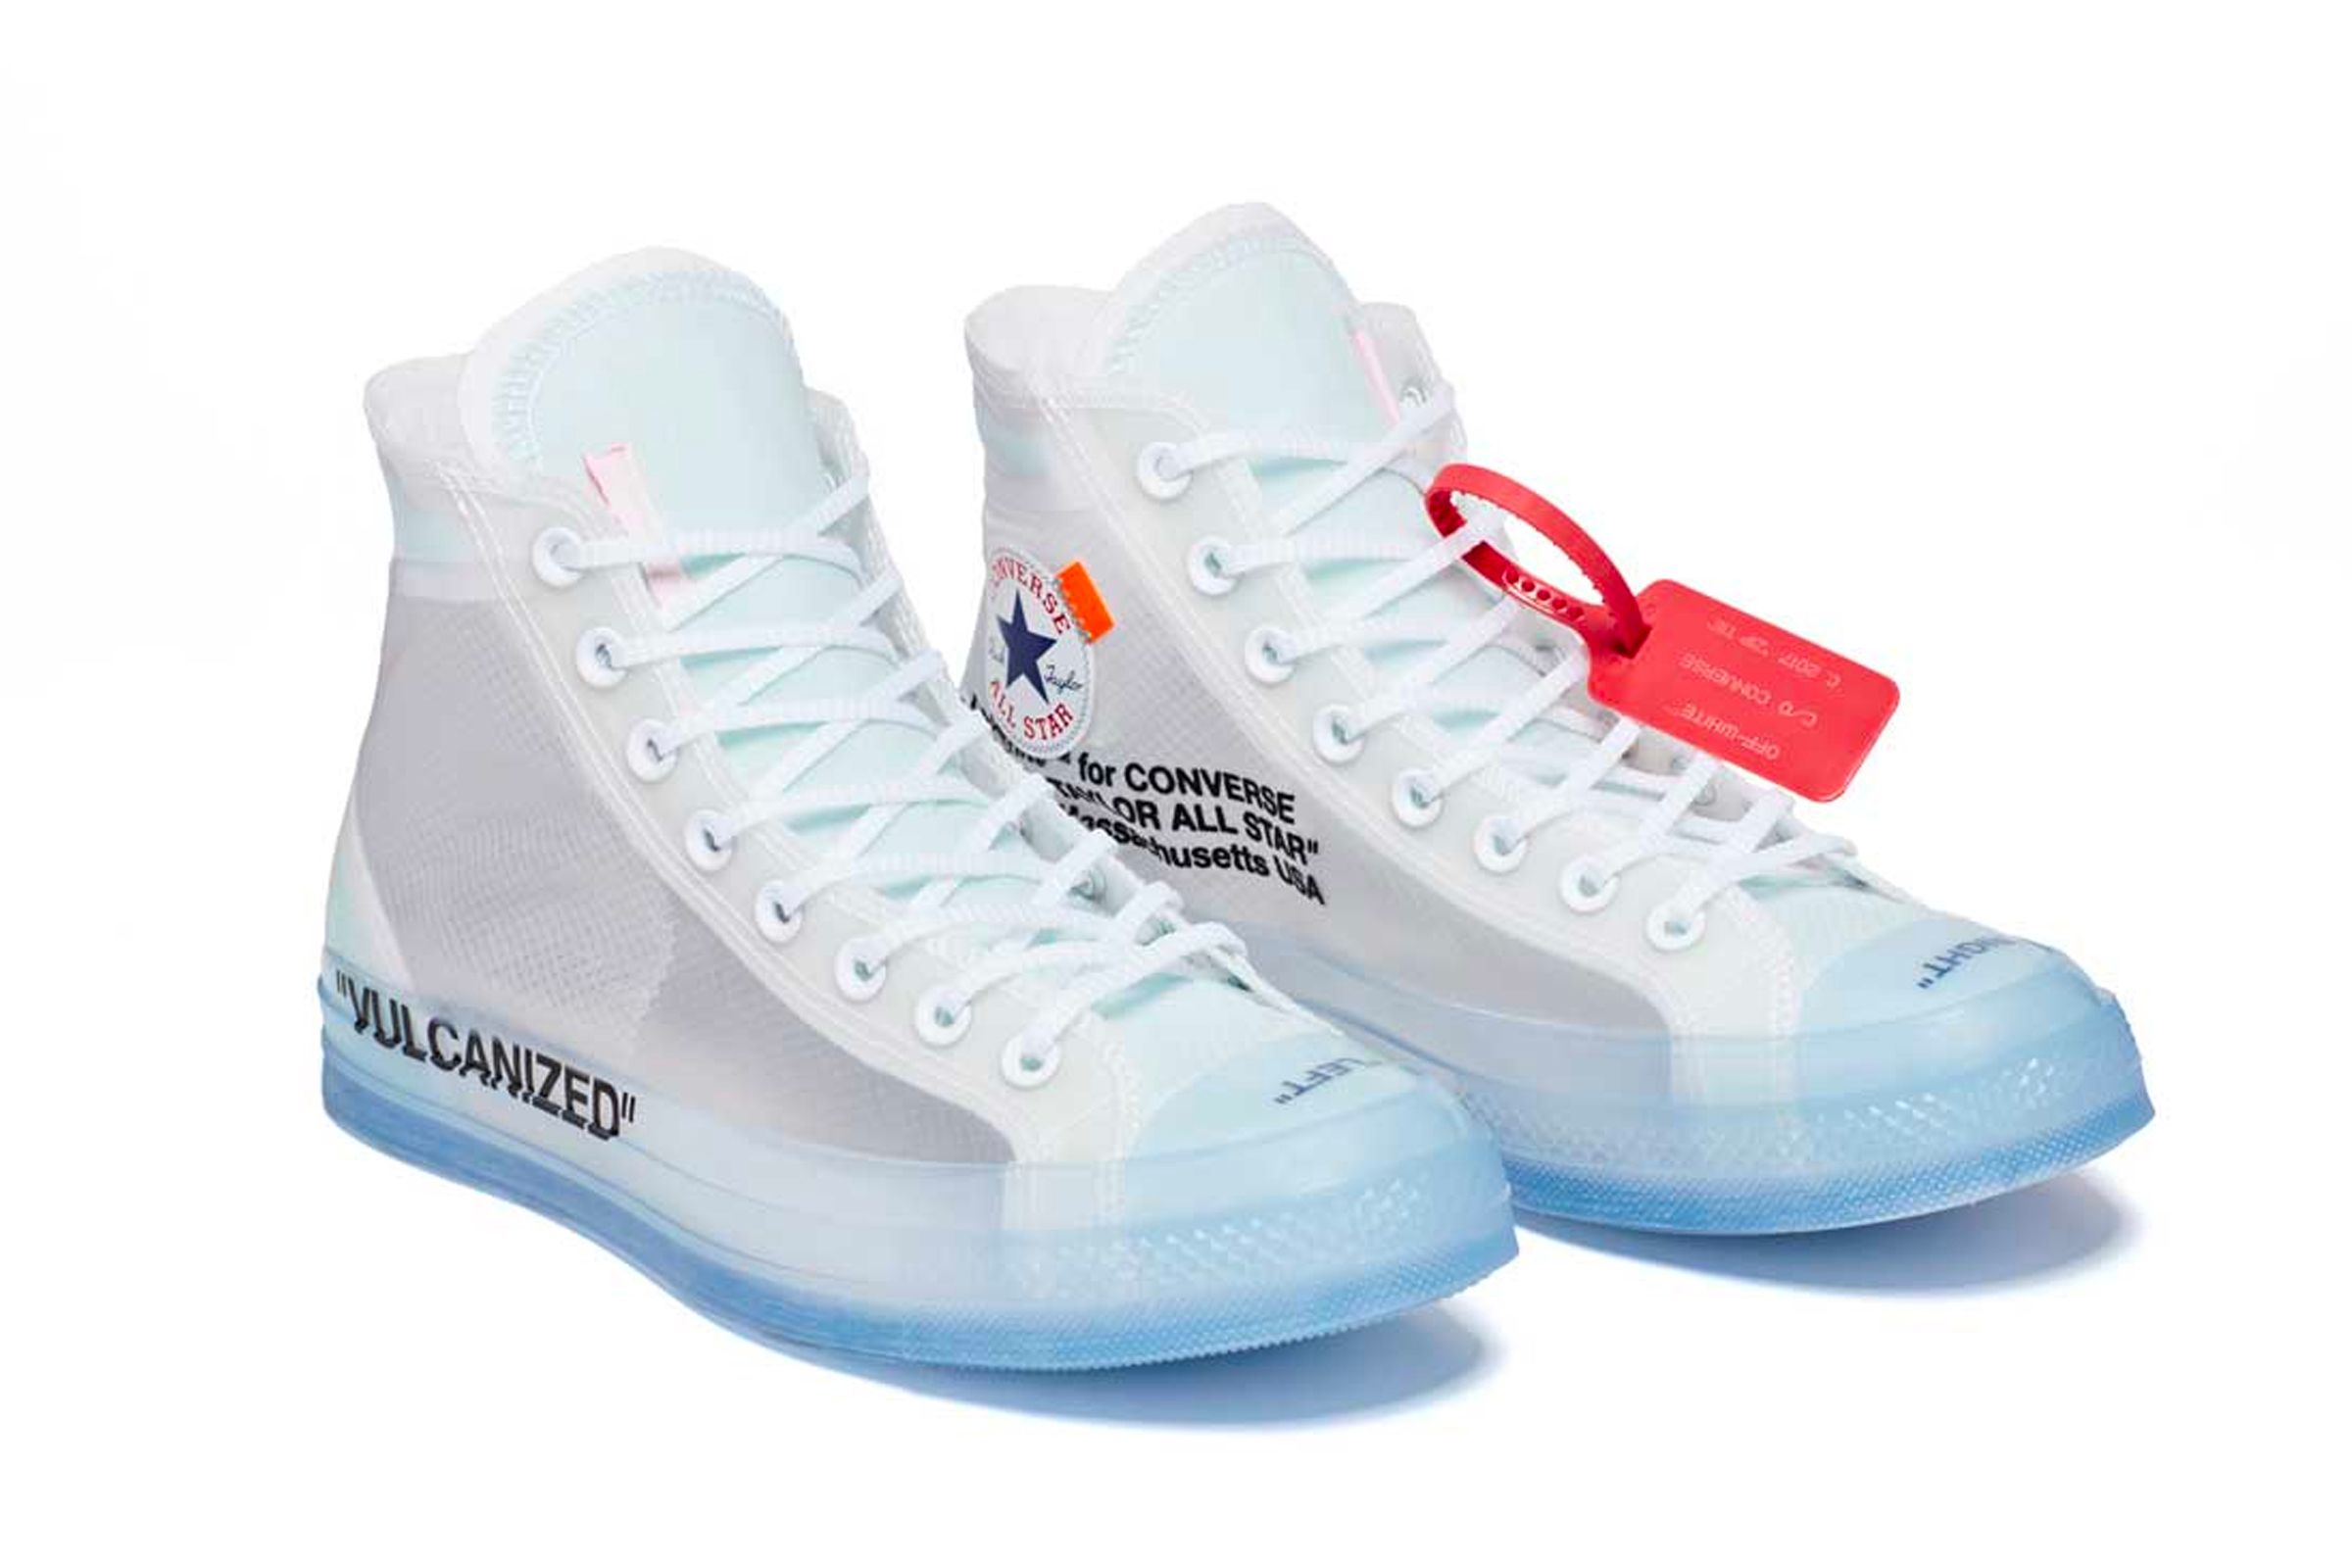 The Off-White x Converse Chuck Taylor Drops This Weekend